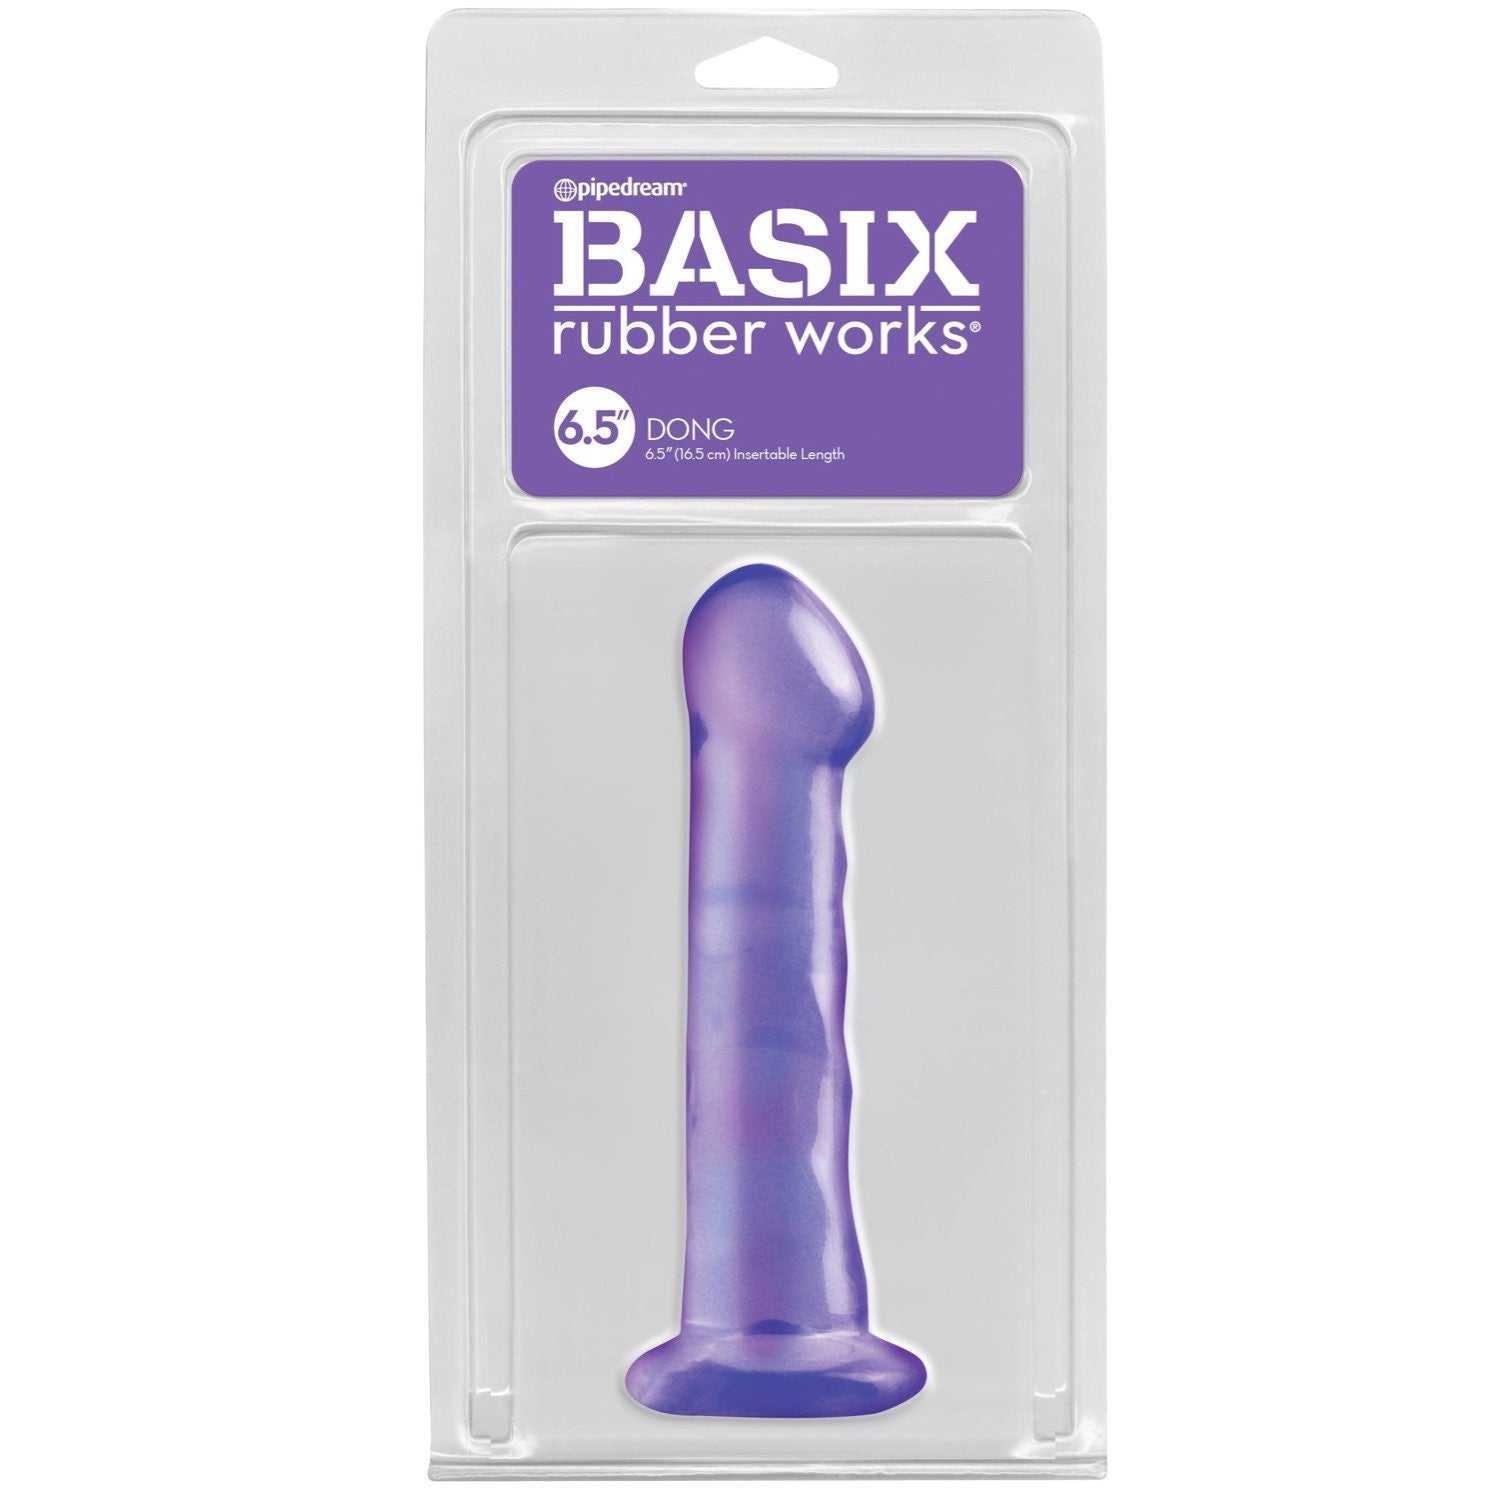 Basix Rubber Works 6.5&quot; Dong with Suction Cup - Purple 16.5 cm (6.5&quot;) Dong by Pipedream